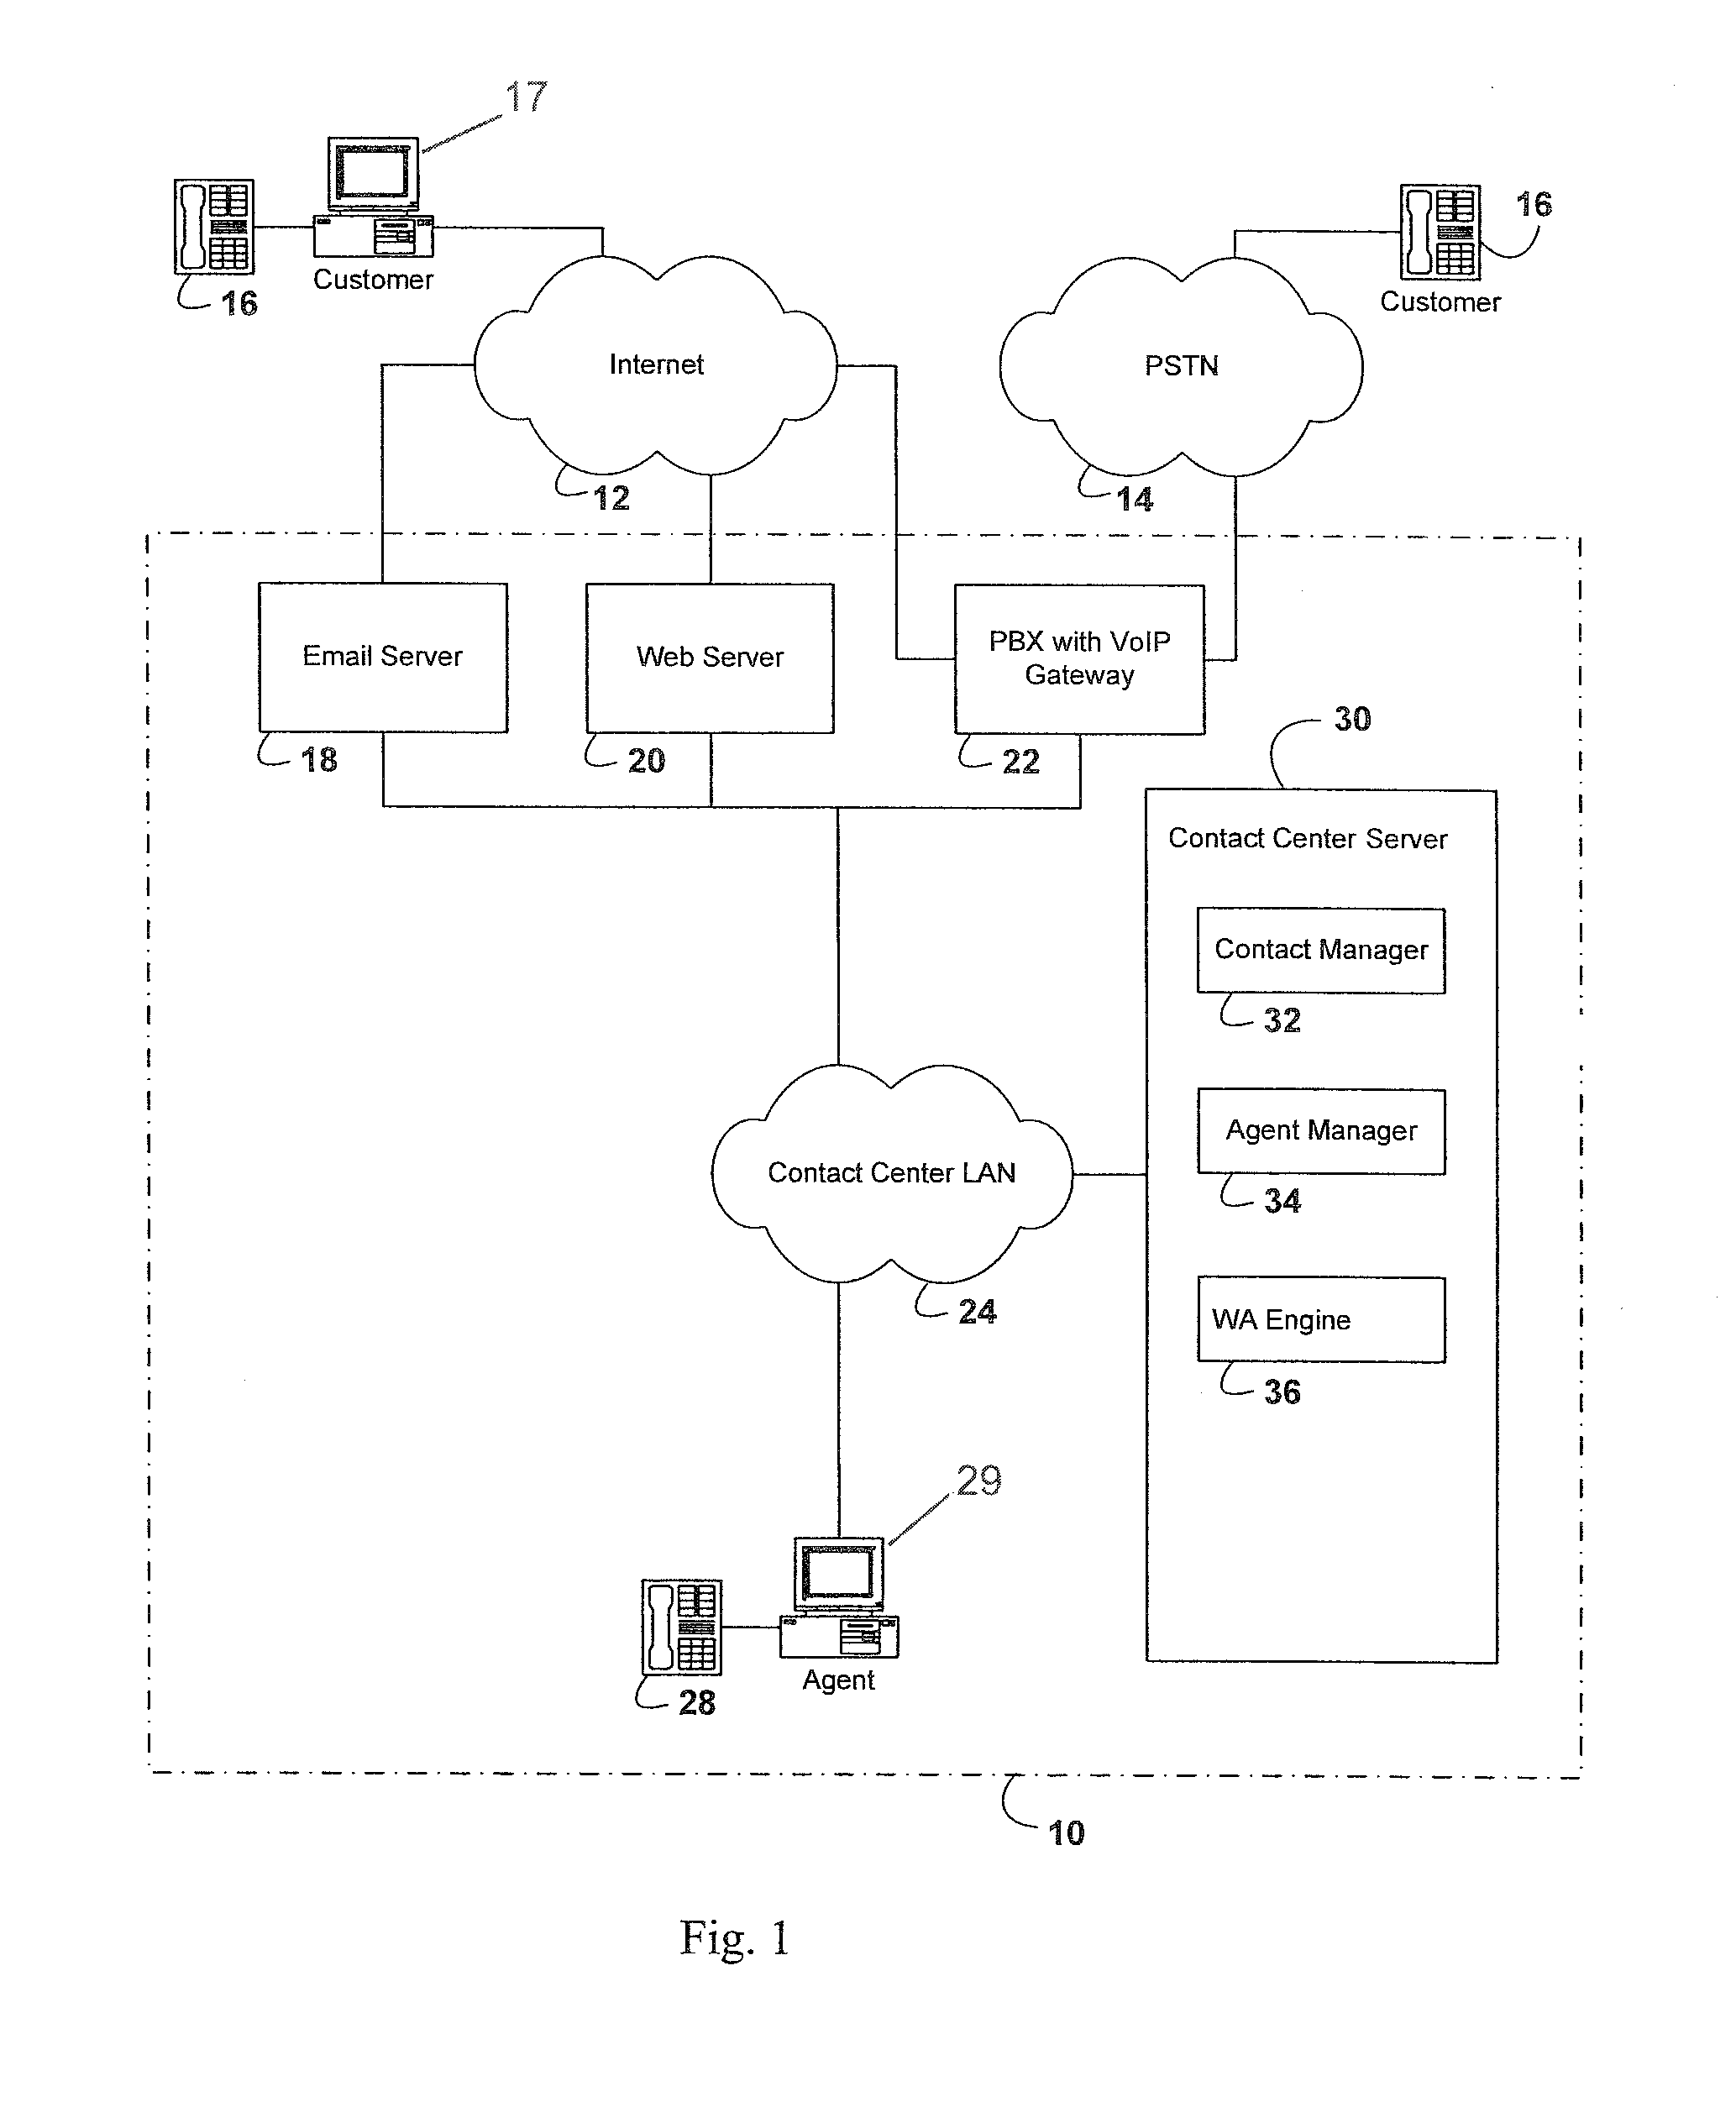 Methods and systems for monitoring contact center operations